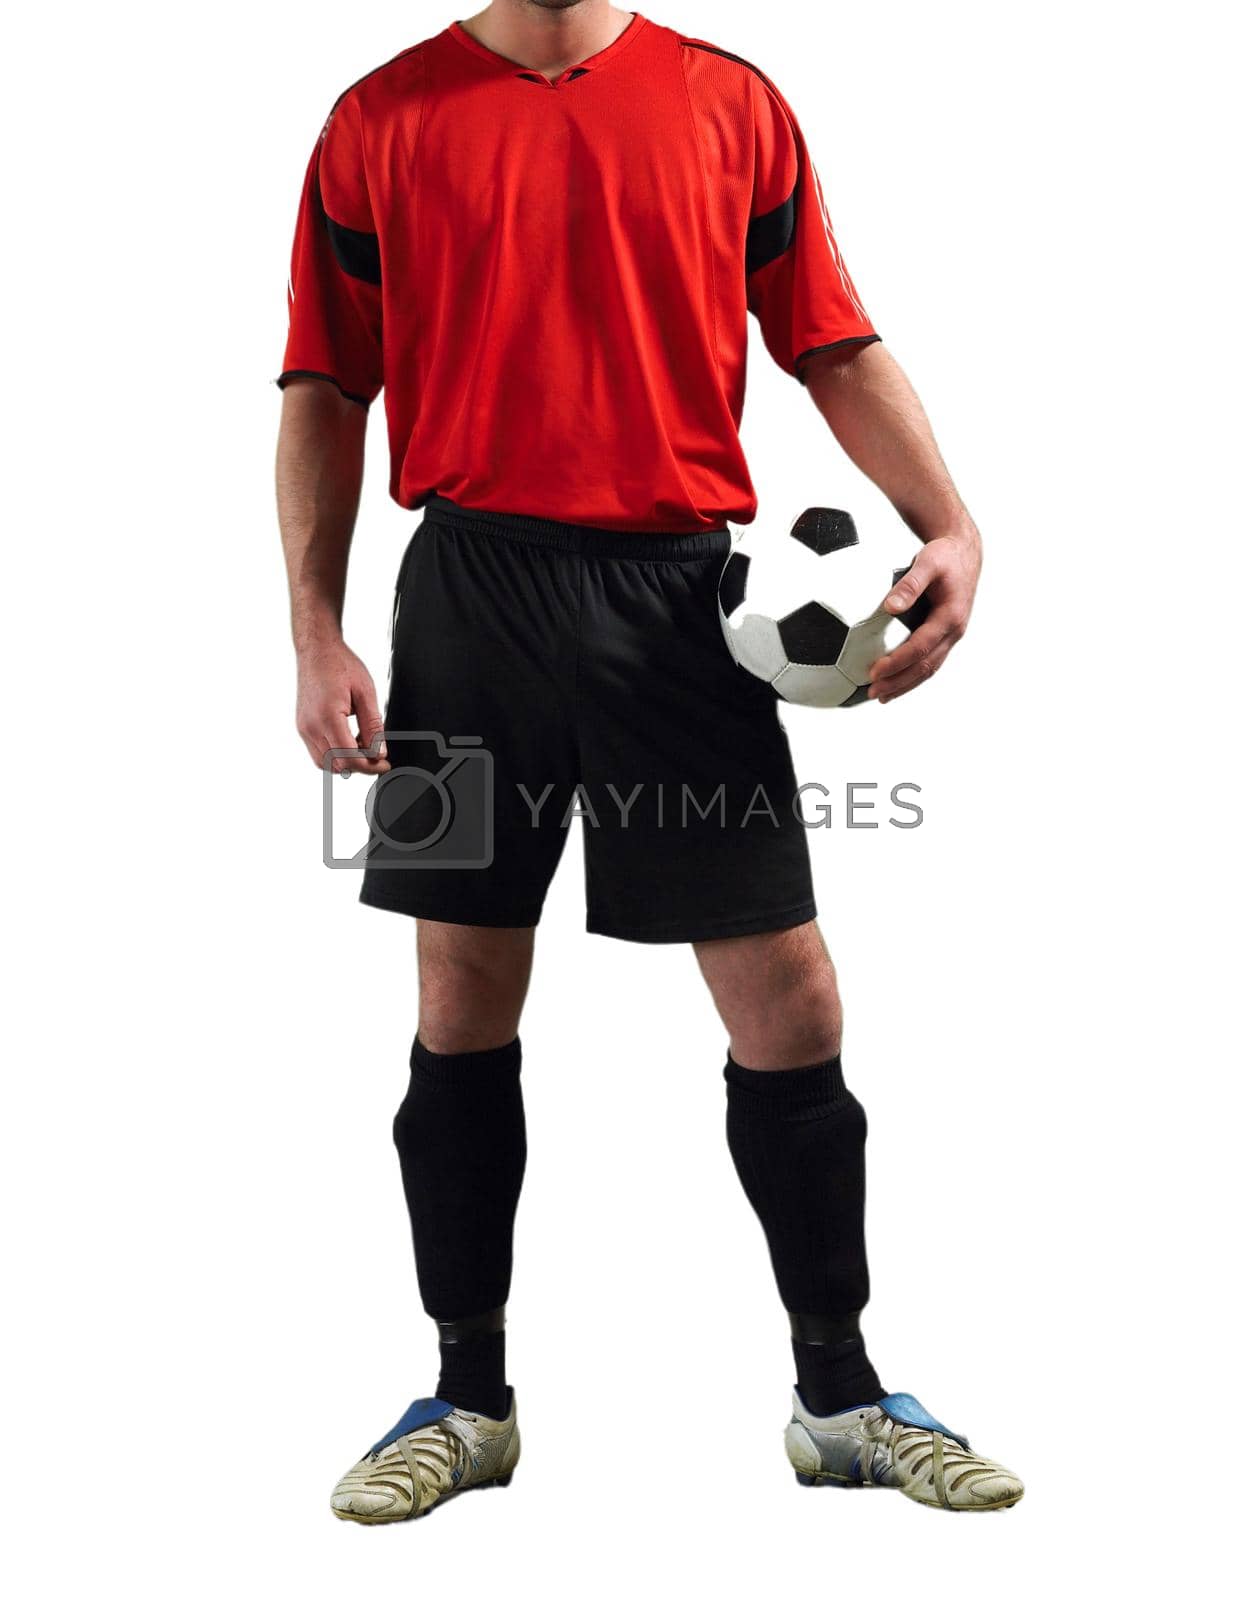 Royalty free image of Cropped Soccer Player holding football in studio by moodboard